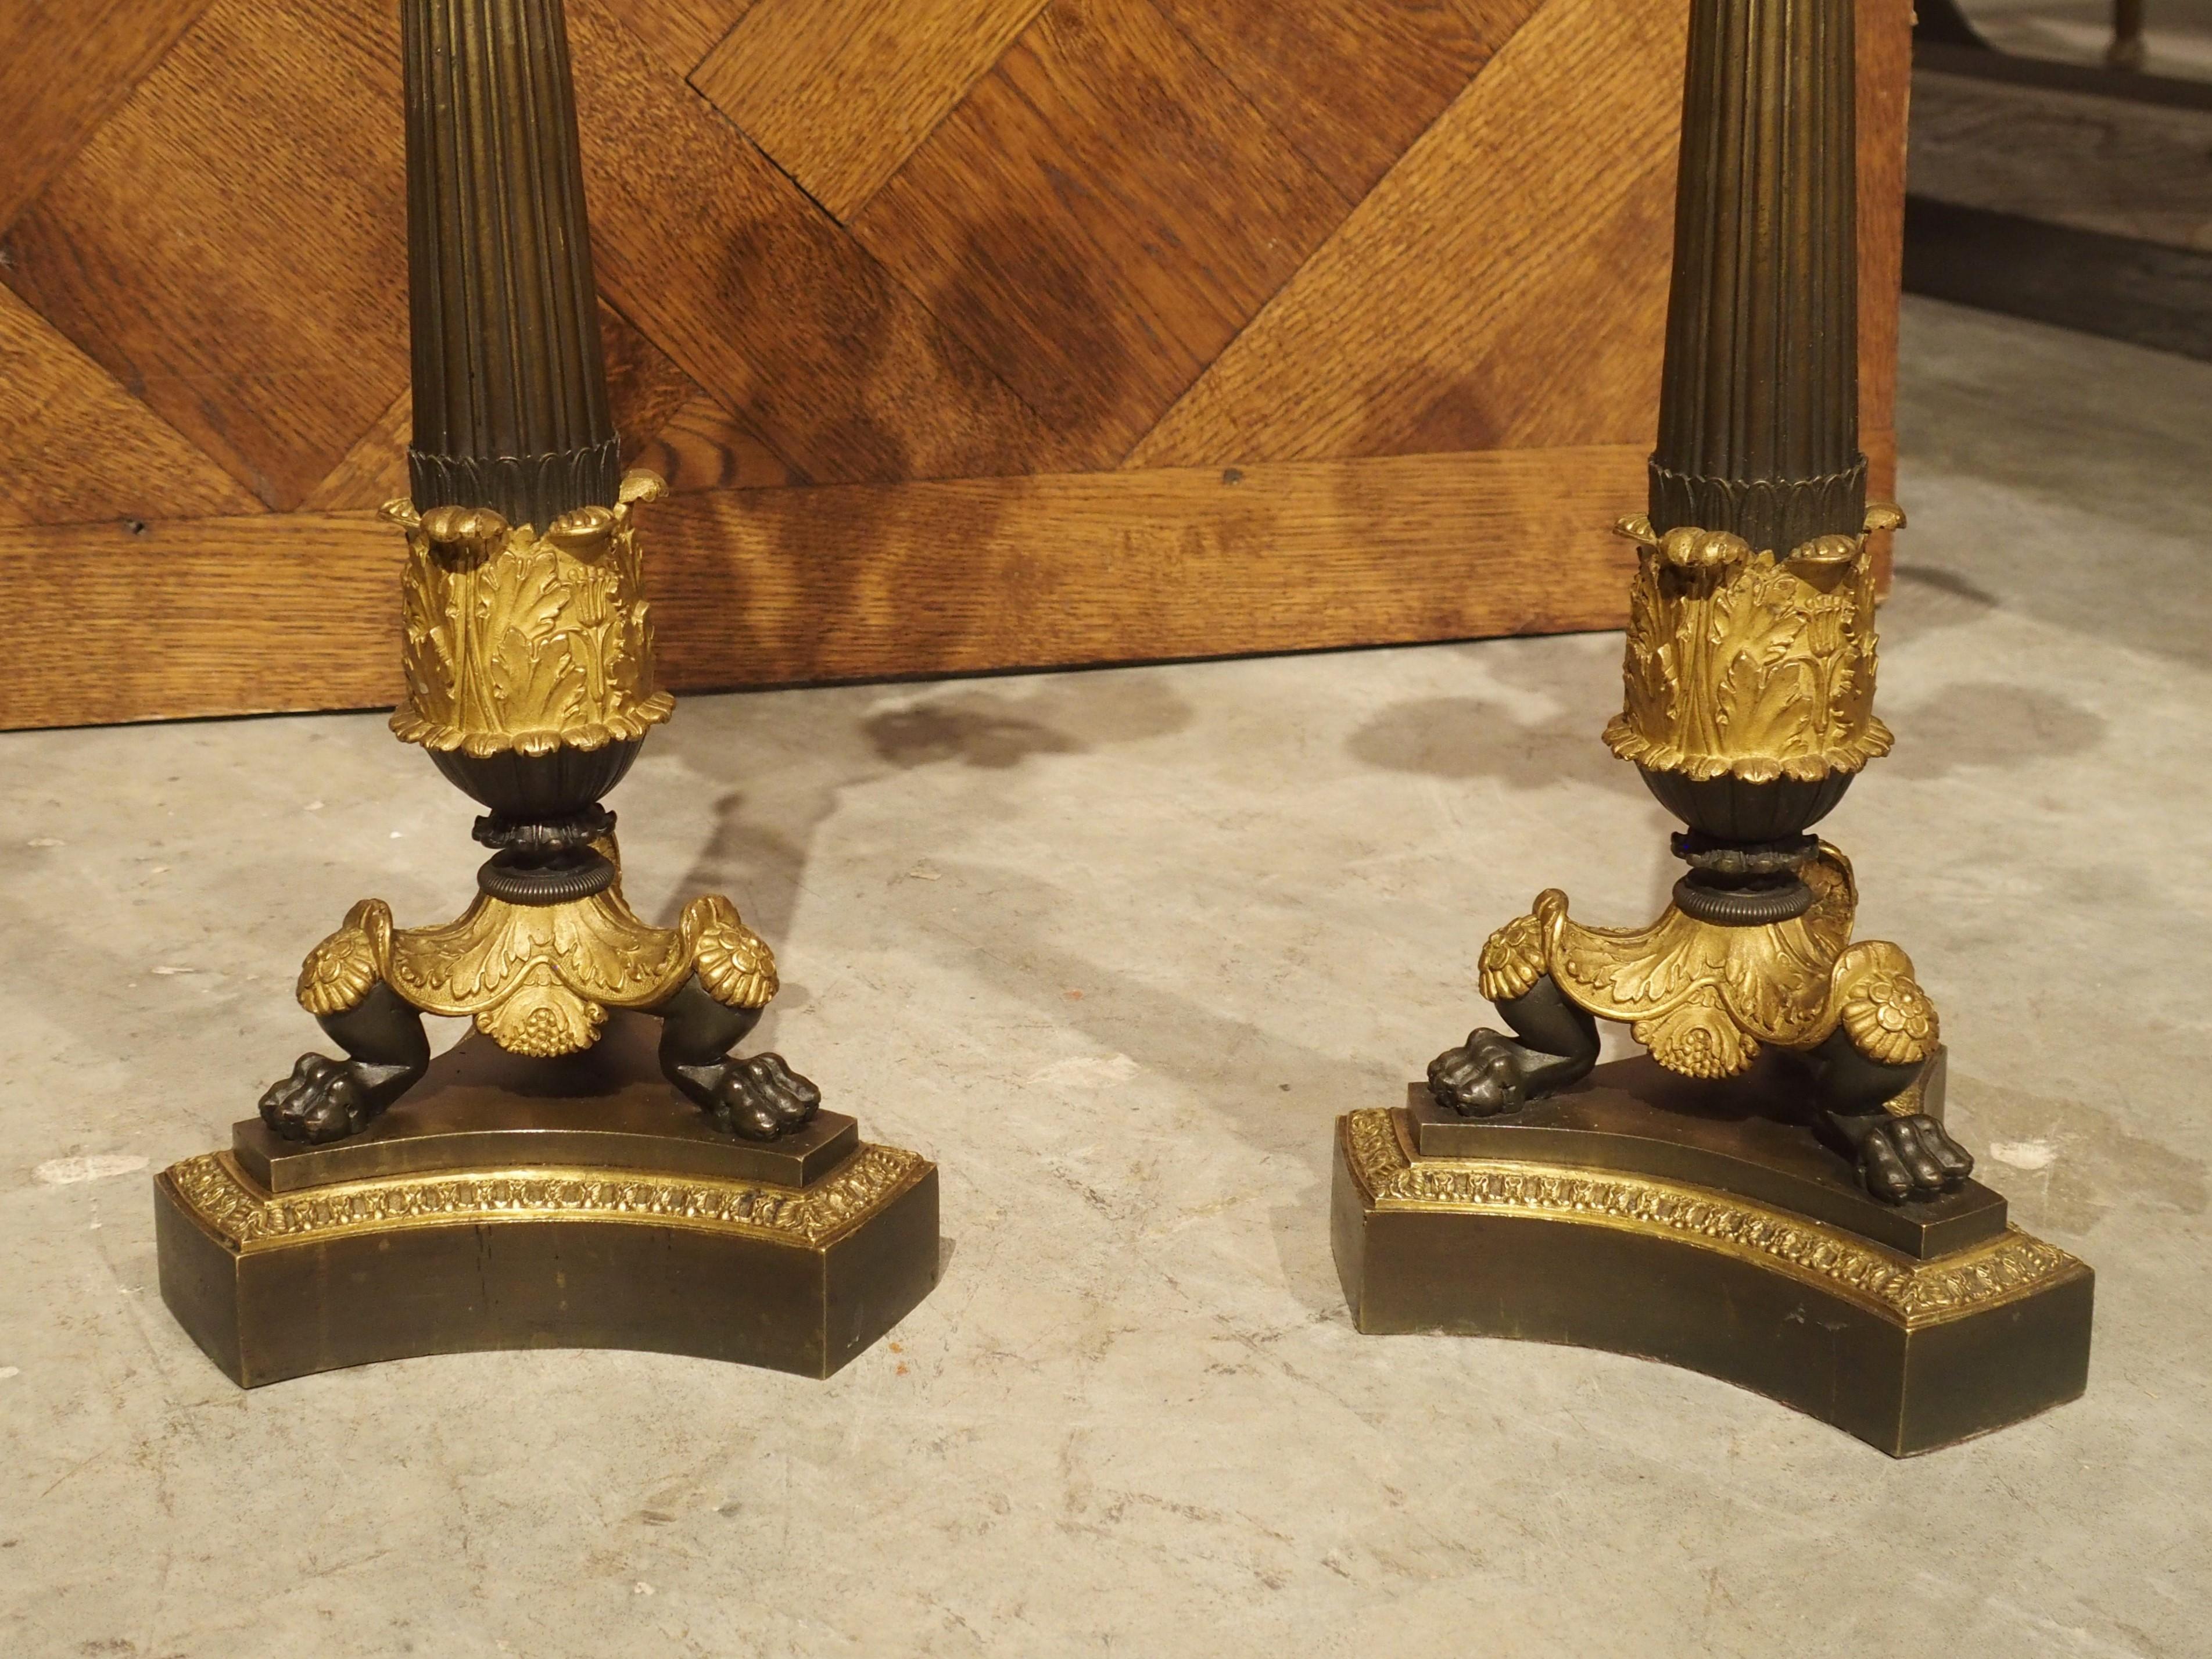 Pair of 19th Century French Empire Candelabra with Tripartite Lion Paw Feet For Sale 15